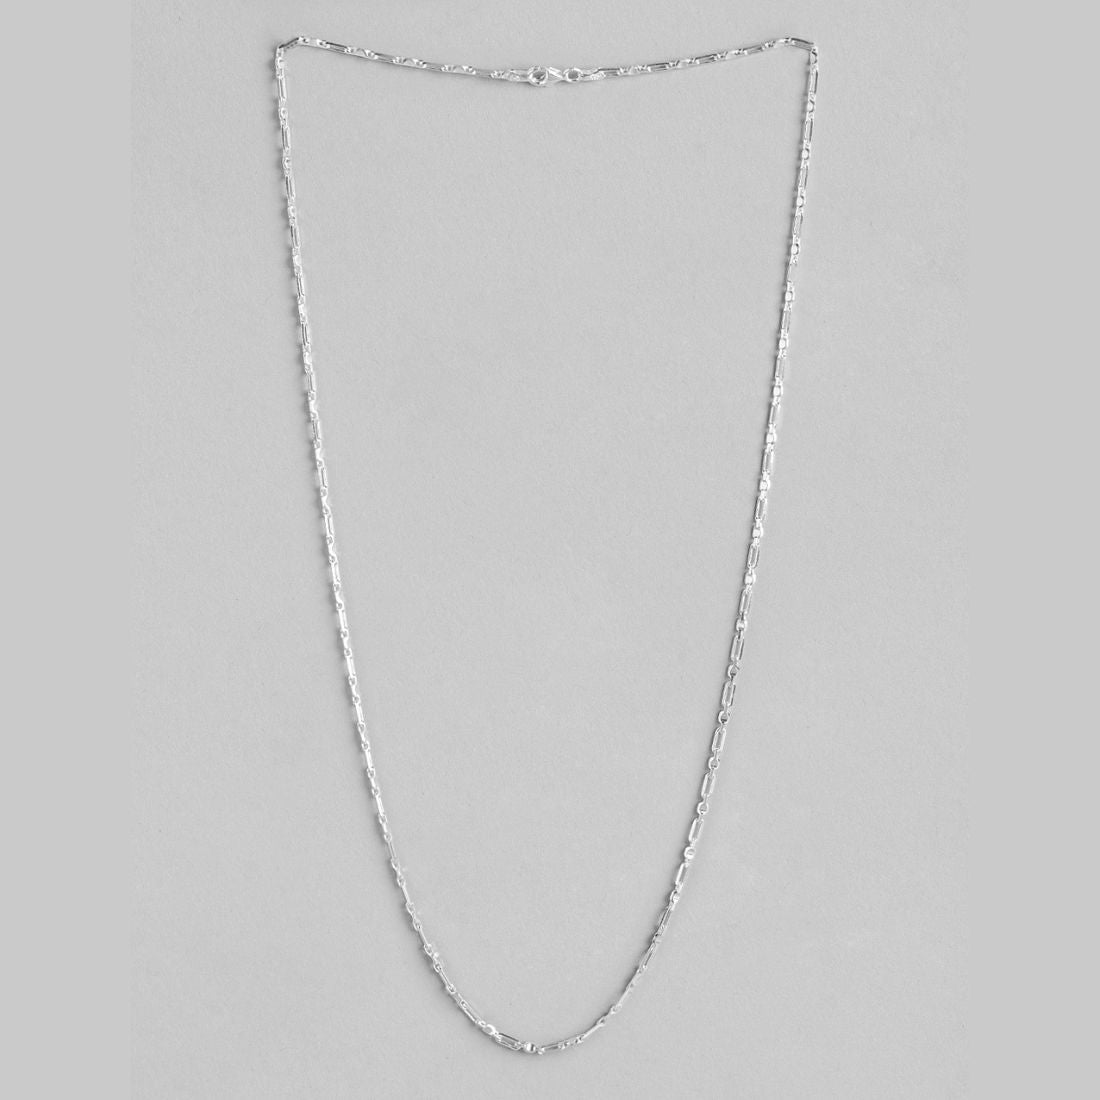 Shimmering Reflections Rhodium-Plated 925 Sterling Silver Chain for Men